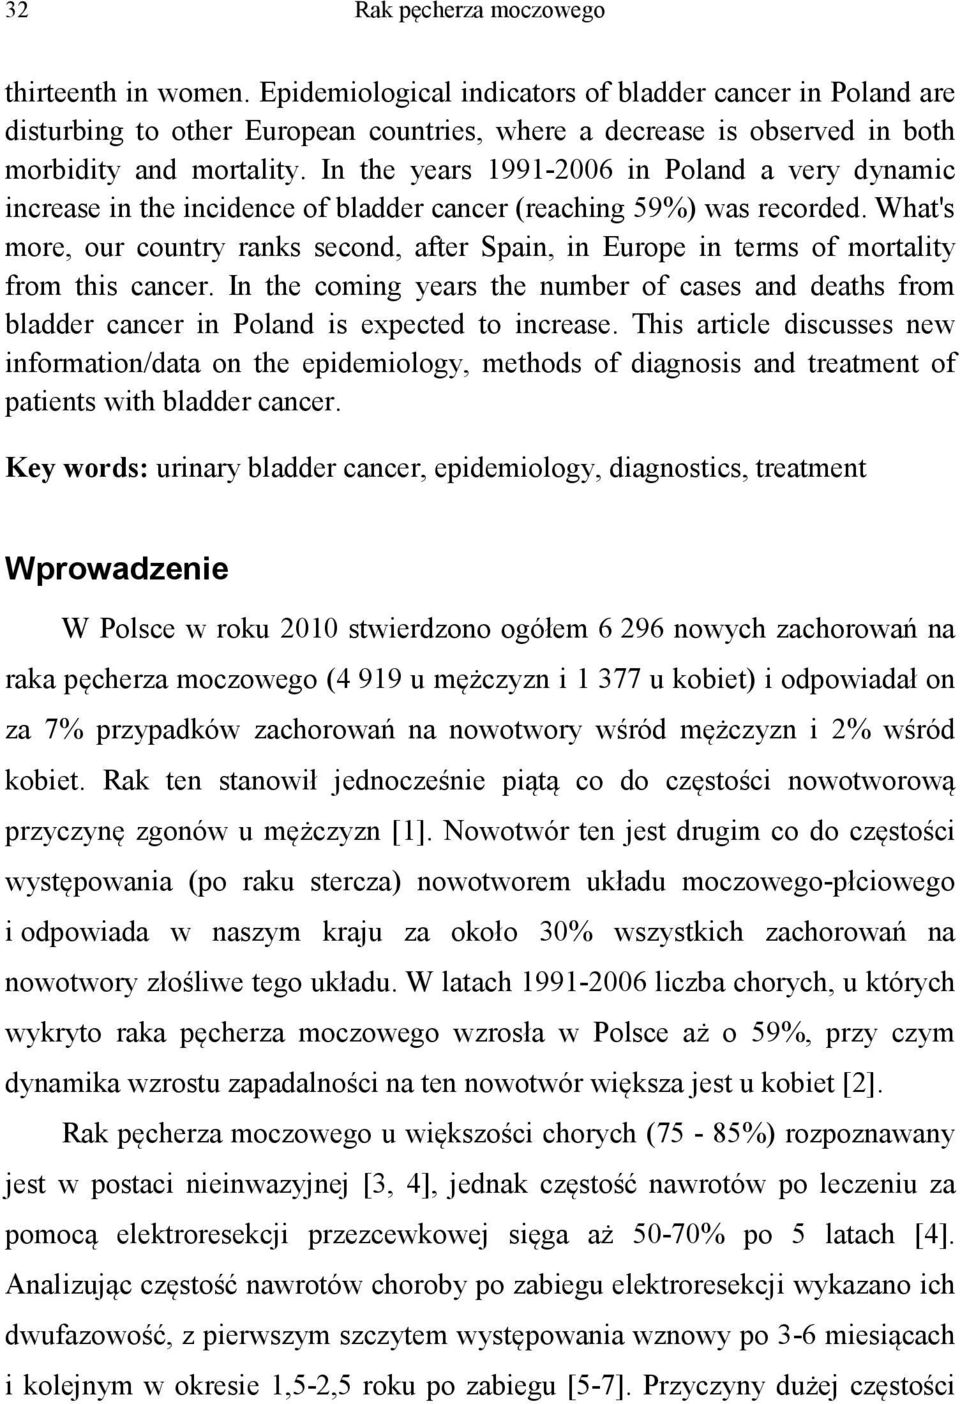 In the years 1991-2006 in Poland a very dynamic increase in the incidence of bladder cancer (reaching 59%) was recorded.